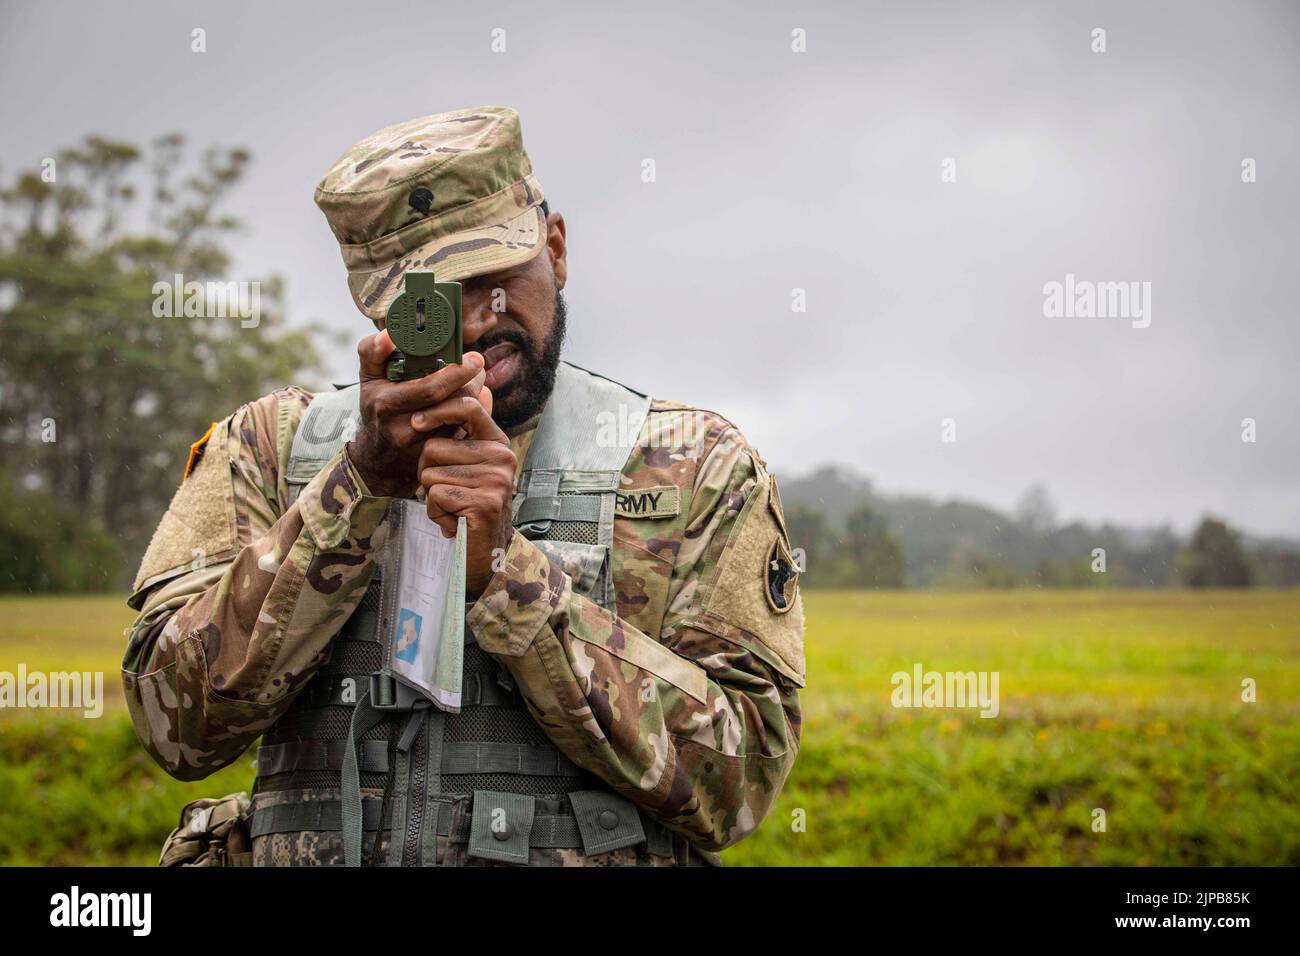 July 18, 2022 - Hawaii, USA - Spc. Marcus Grant assigned to U.S. Army Japan looks through his compass July 18 at Lightning Academy, Hawaii during the land navigation for the 2022 U.S. Army Pacific Best Squad Competition. The 2022 U.S. Army Pacific Best Squad Competition consists of multiple 5-Soldier squads from USARPAC units competing for the opportunity to represent USARPAC at the Department of the Armys competition. stations. The non-commissioned officers and junior enlisted will be assessed together in their ability to execute warrior tasks and battle drills, marksmanship and land navigati Stock Photo